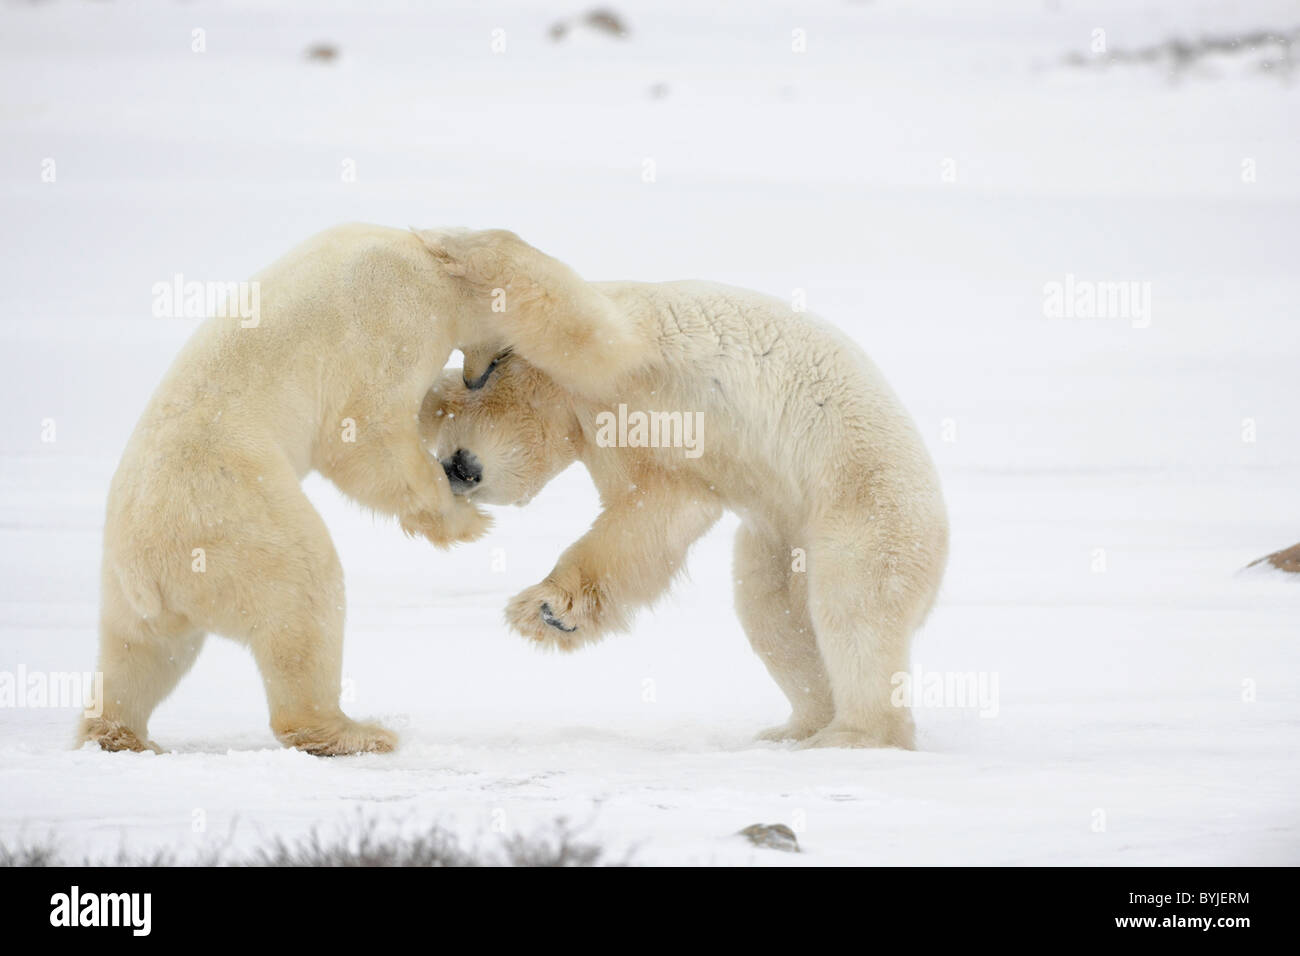 Fight of polar bears. Polar bears were linked in fight and bite each other. Stock Photo